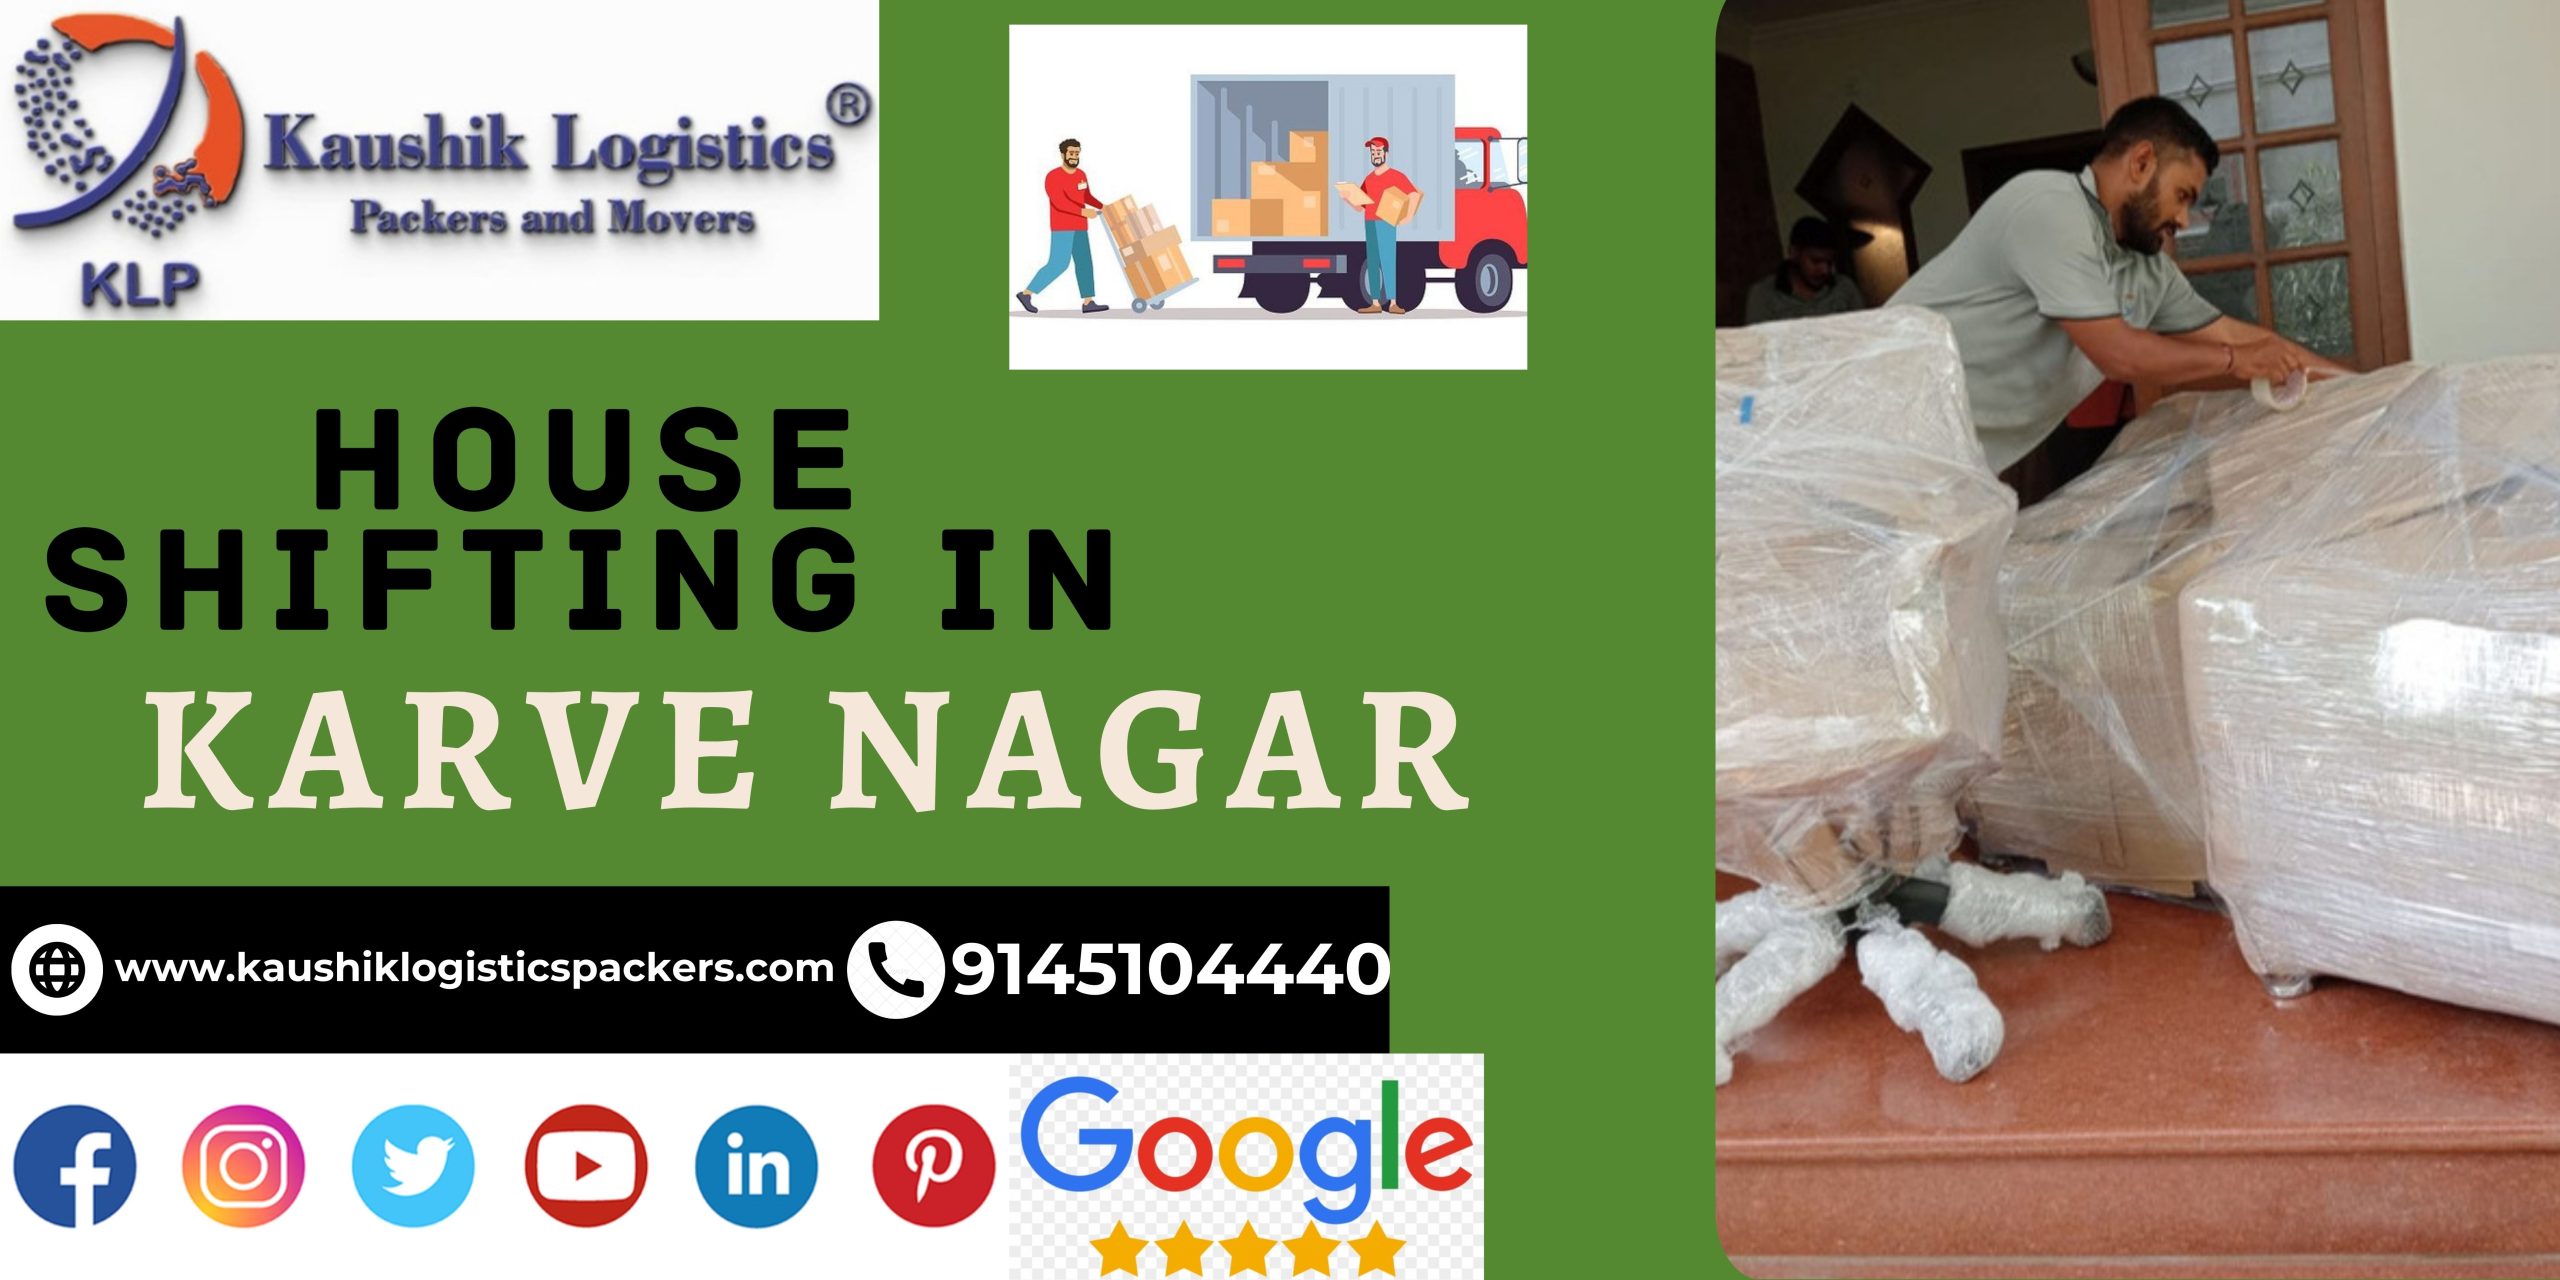 Packers and Movers In Karve Nagar